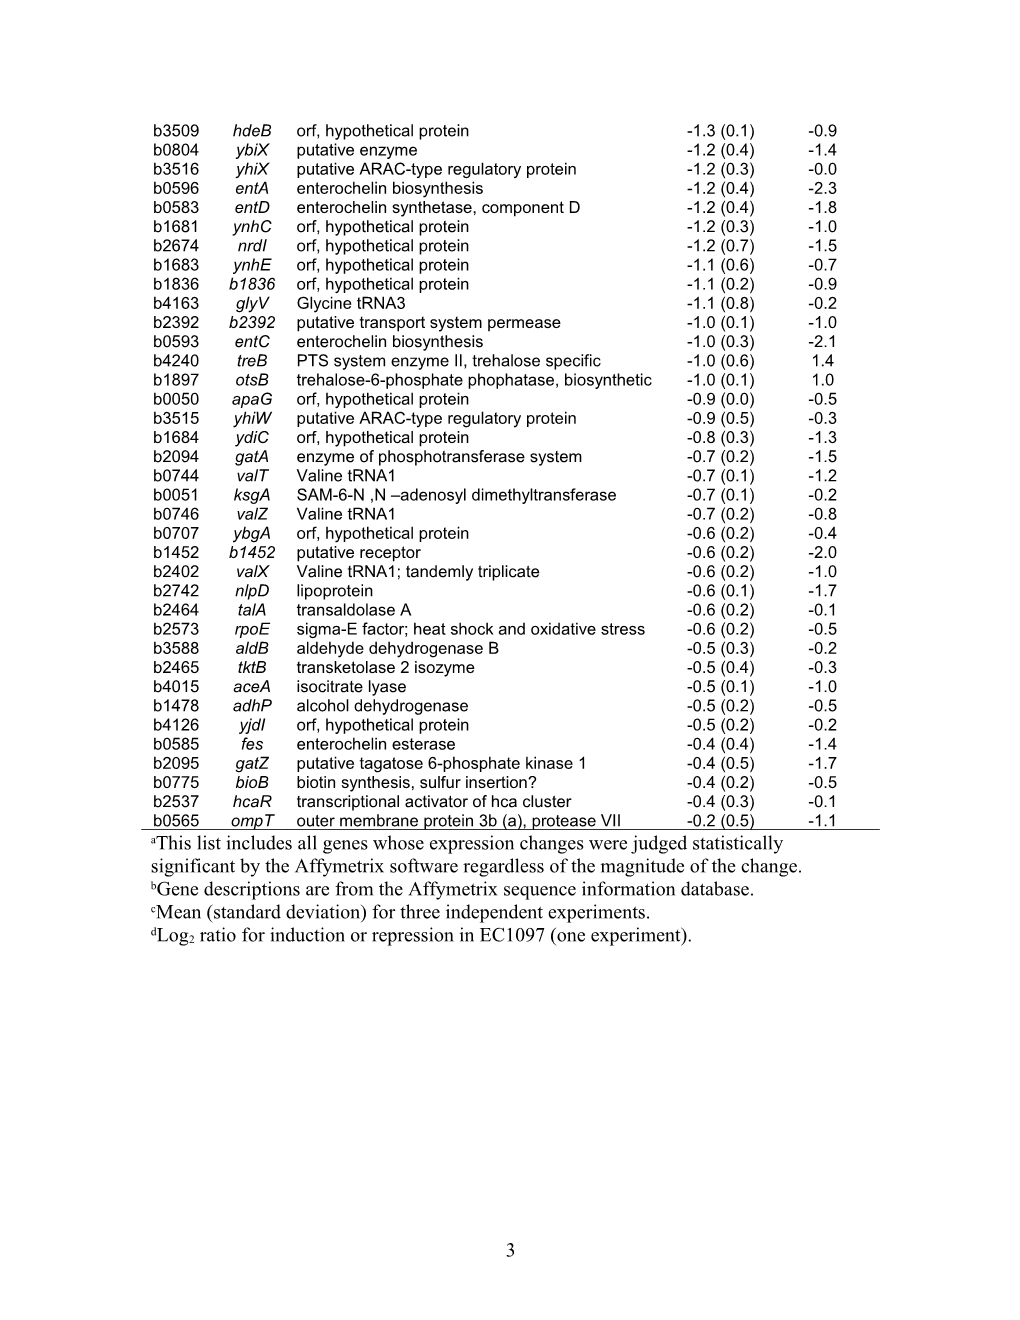 Supplemental Table II. Genes Induced Or Repressed in Filamentous Cellsa